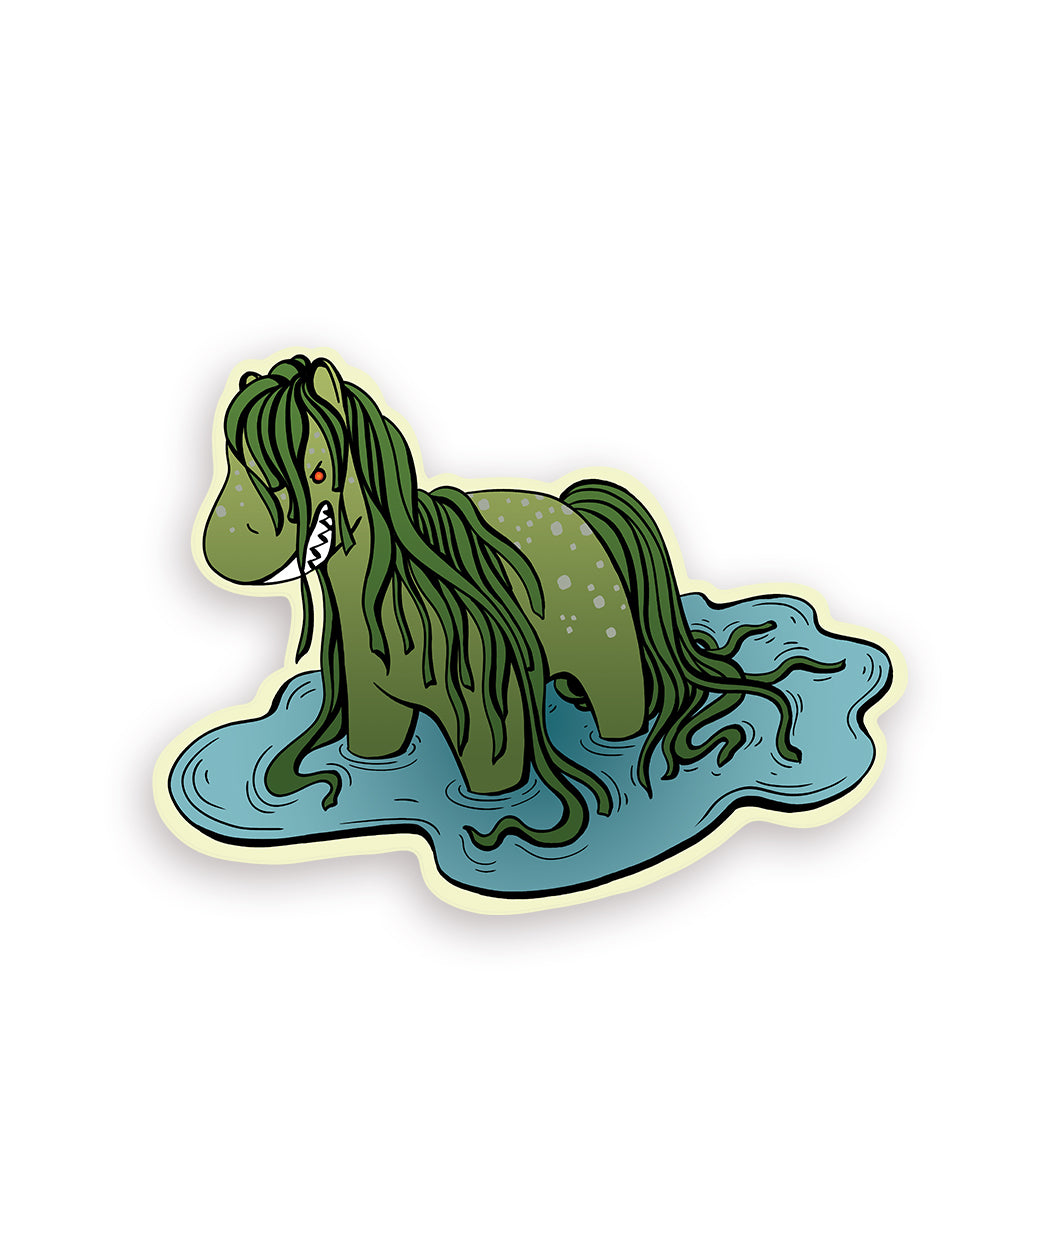 The Spirits sticker of the month for Sept is a Kelpie, a horse like creature with a seaweed mane and tail. It has a red eye and it barring its teeth. Surrounded by water. 